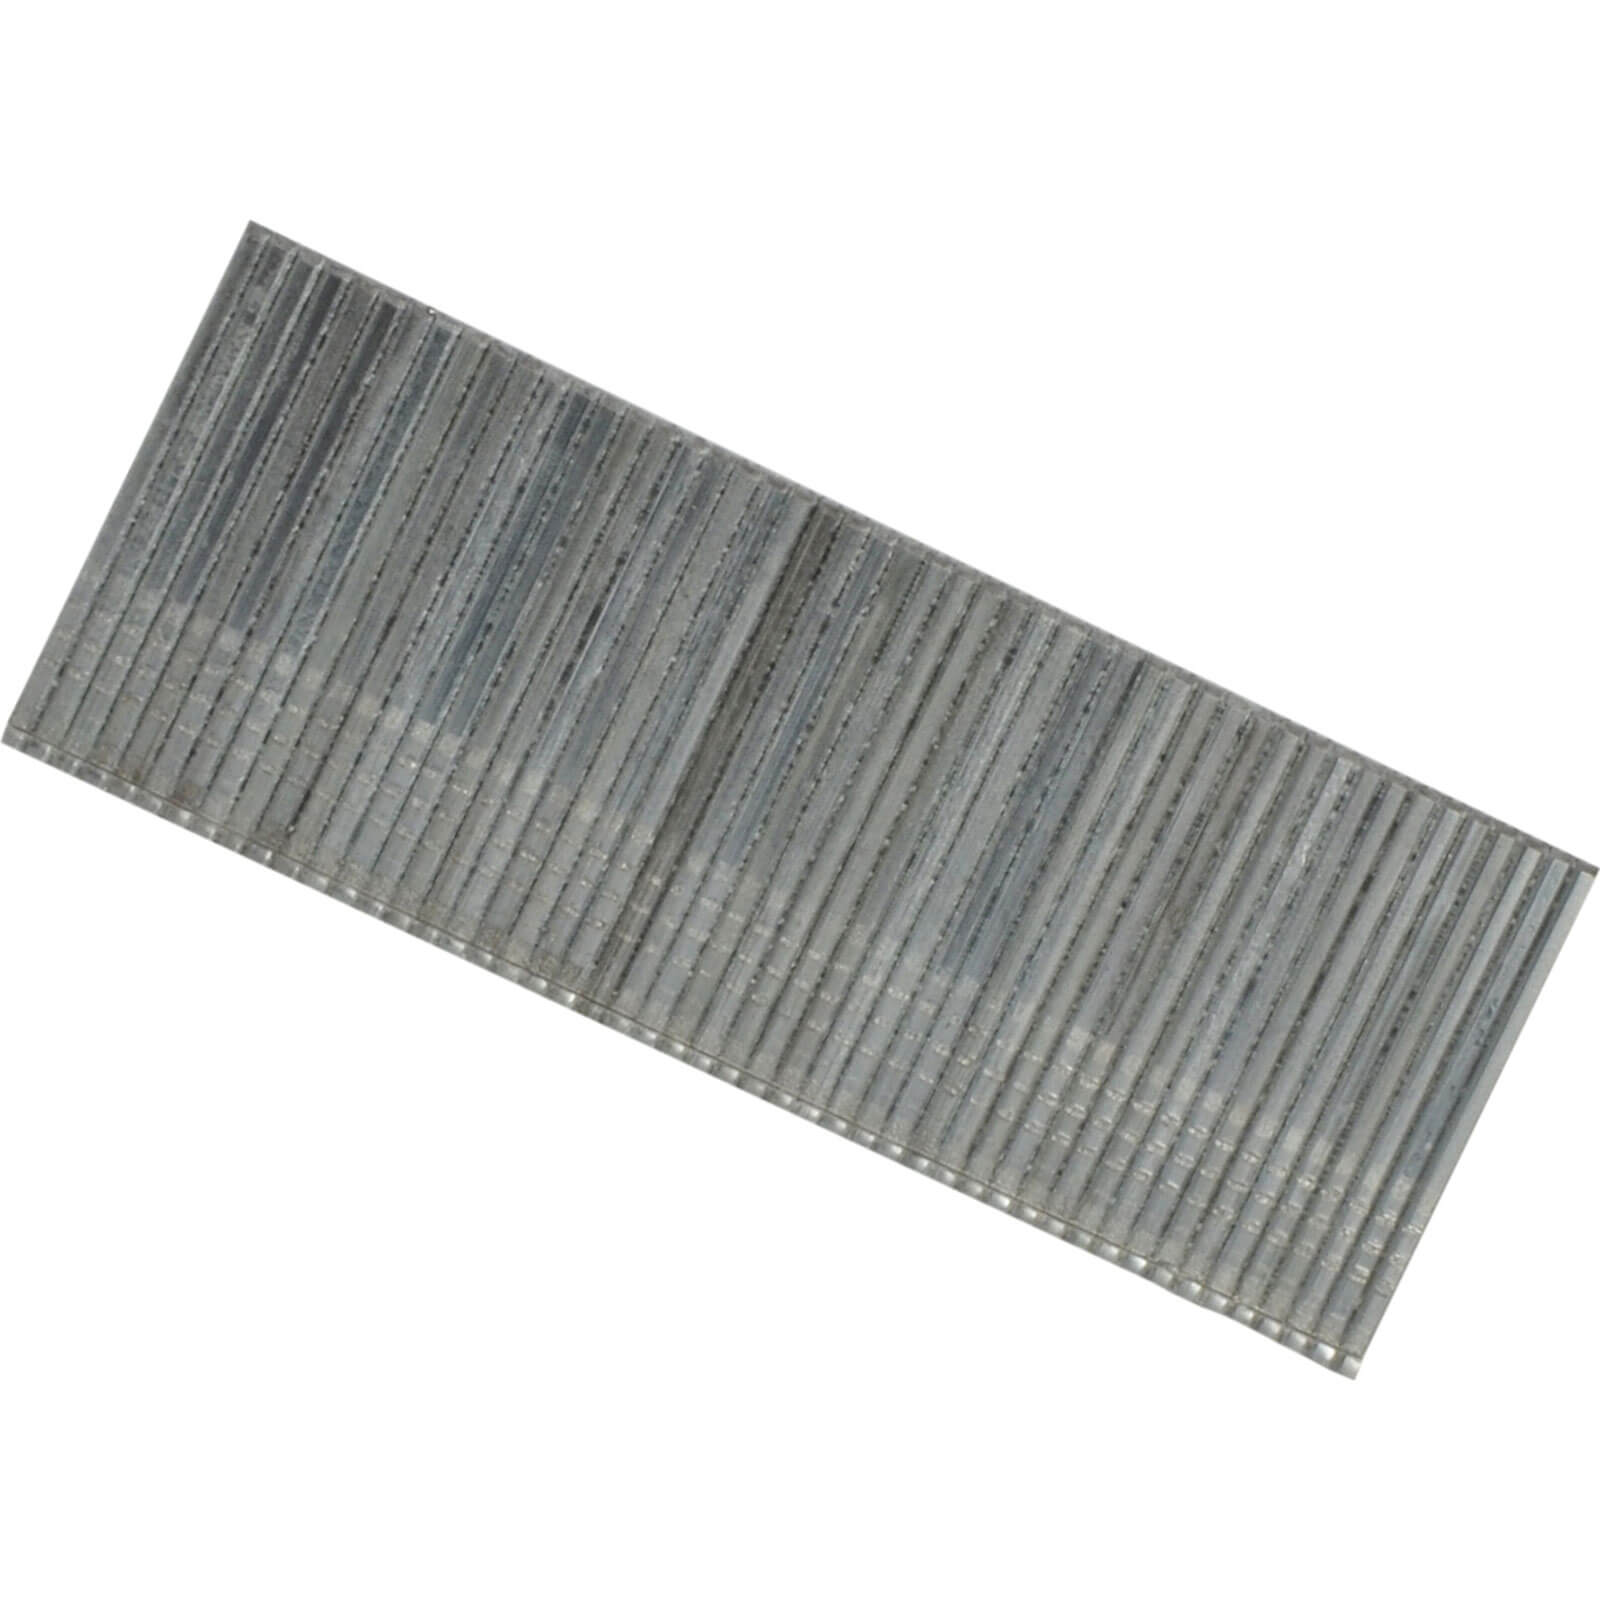 Photo of Bostitch 16 Gauge Straight Finish Nails 32mm Pack Of 2500